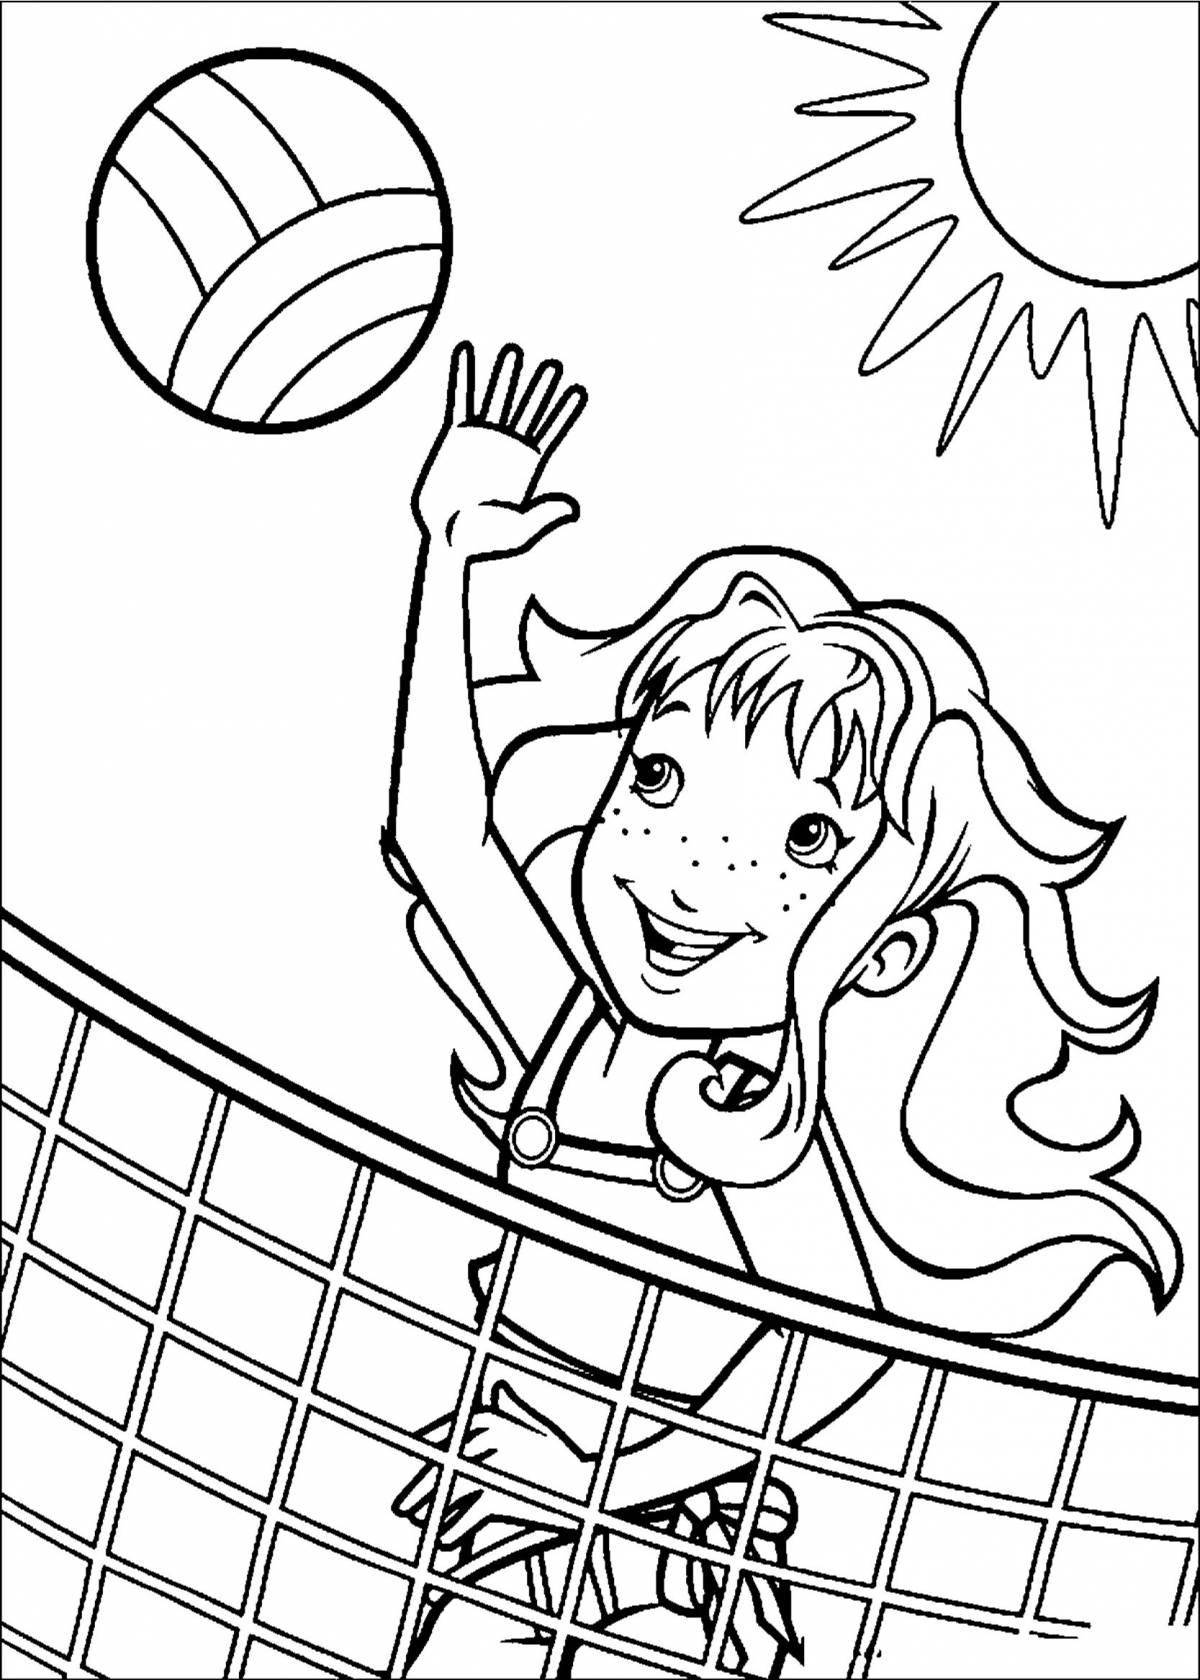 Sweet sports coloring pages for kids